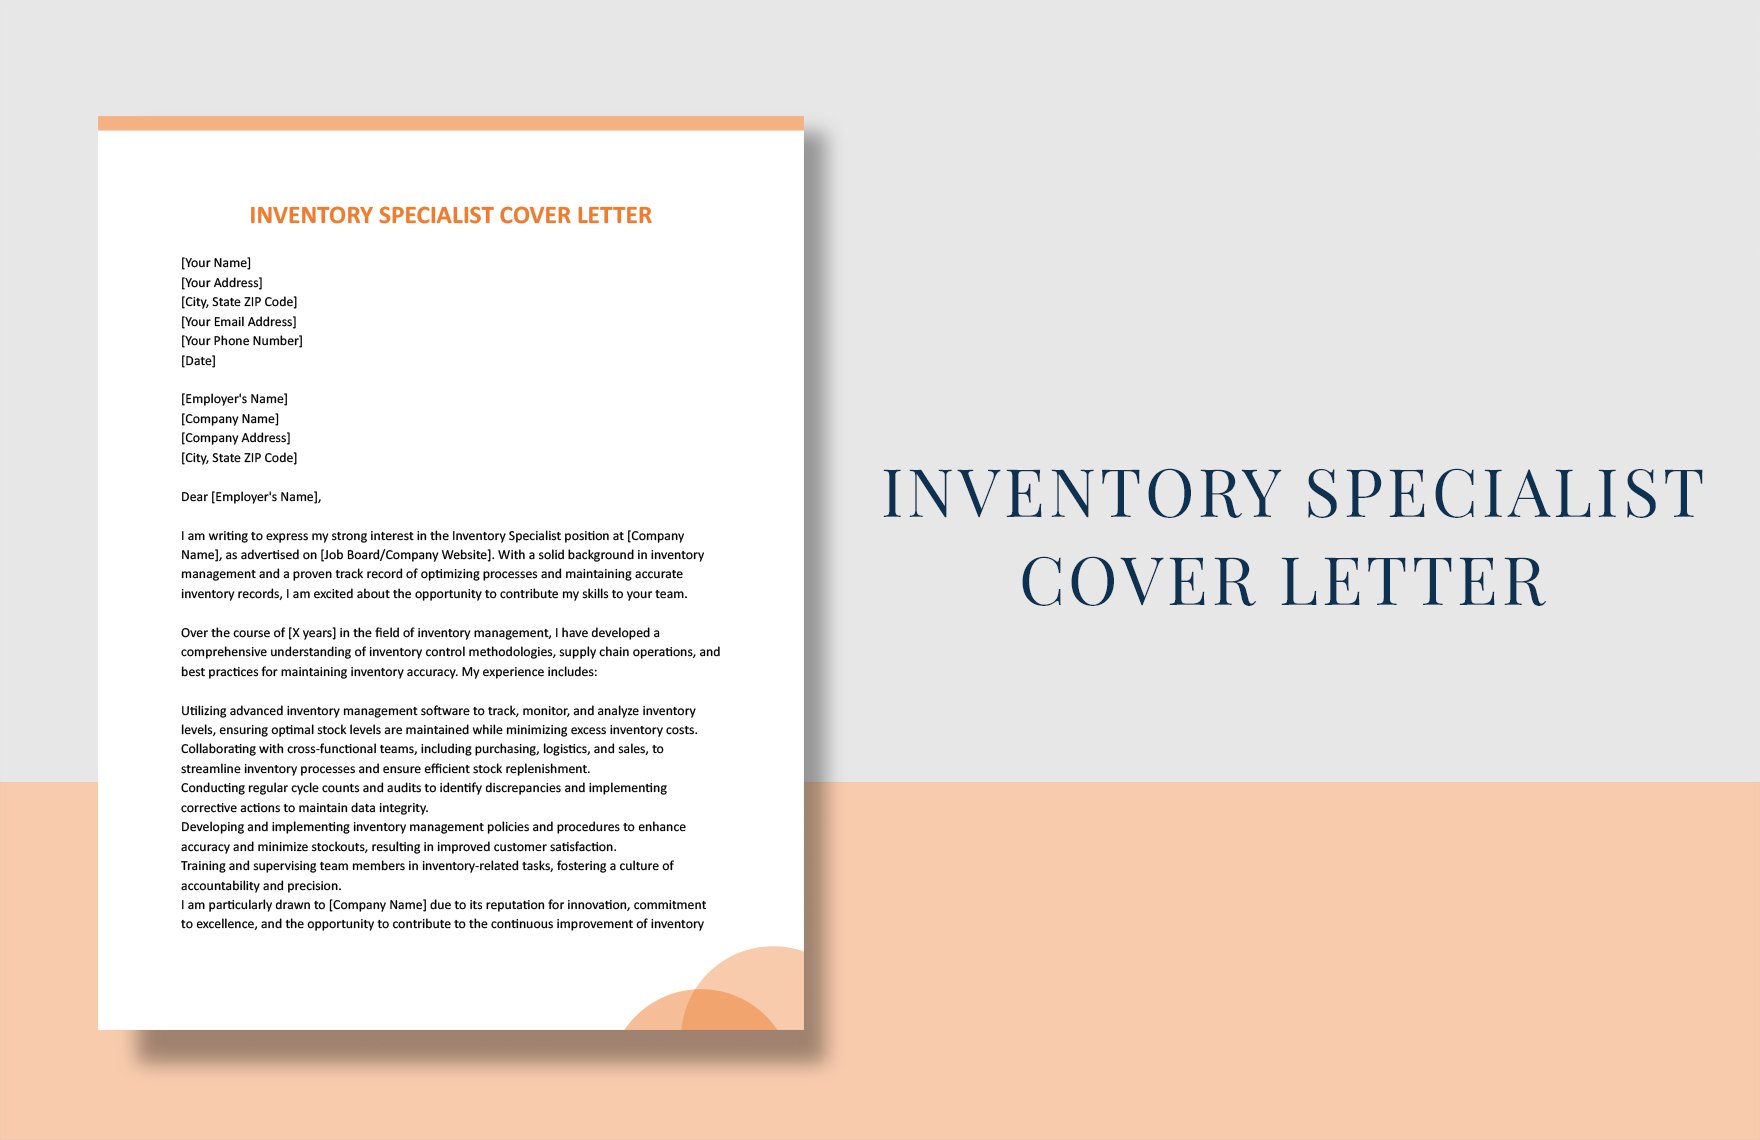 Inventory Specialist Cover Letter in Word, Google Docs